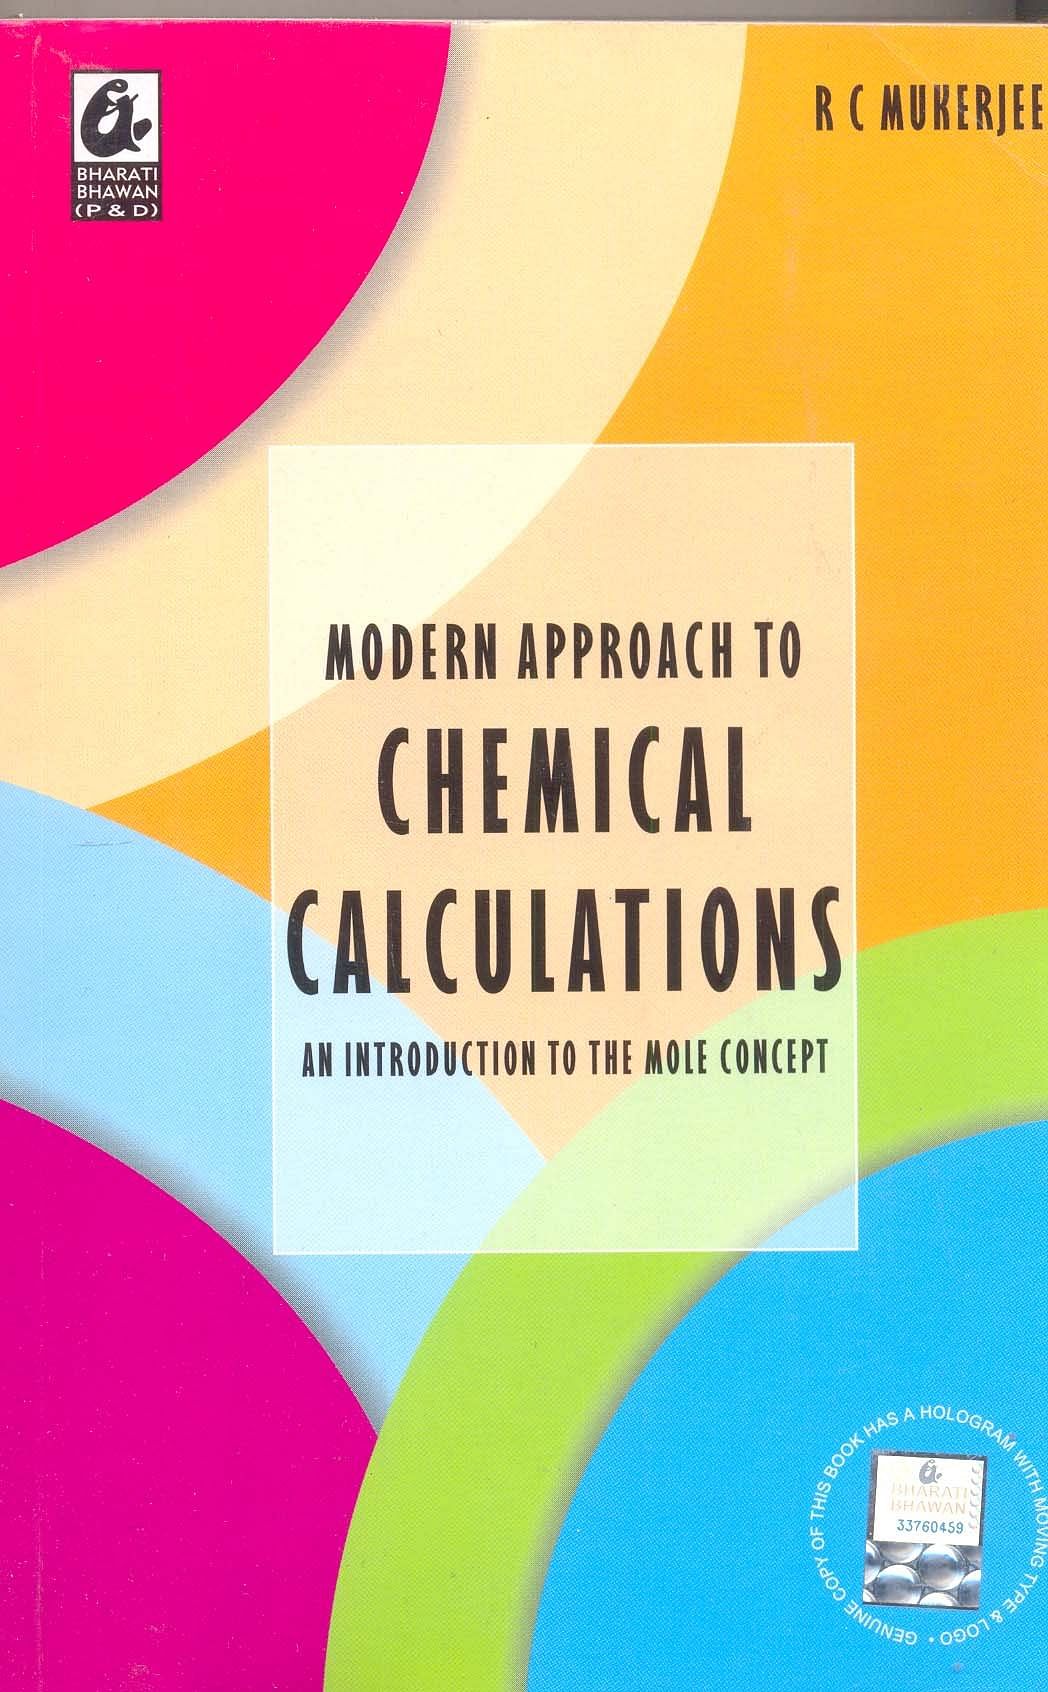 Modern Approach to Chemical Calculation by R C Mukherjee